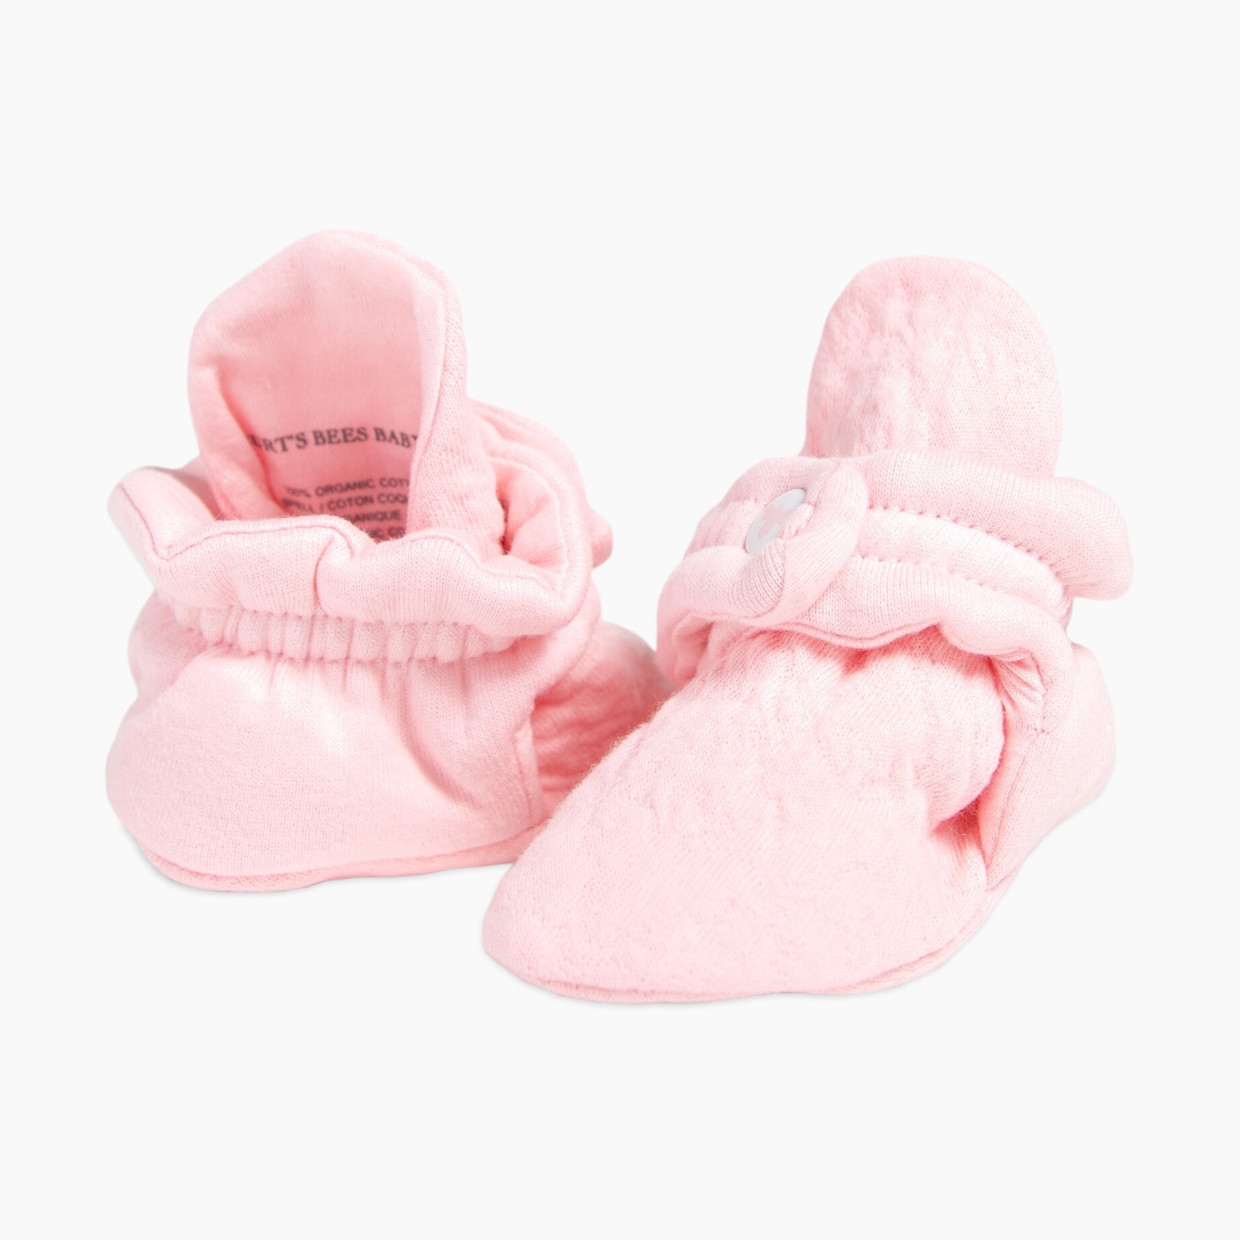 Burt's Bees Baby Quilted Bee Booties - Blossom, 0-3 Months.